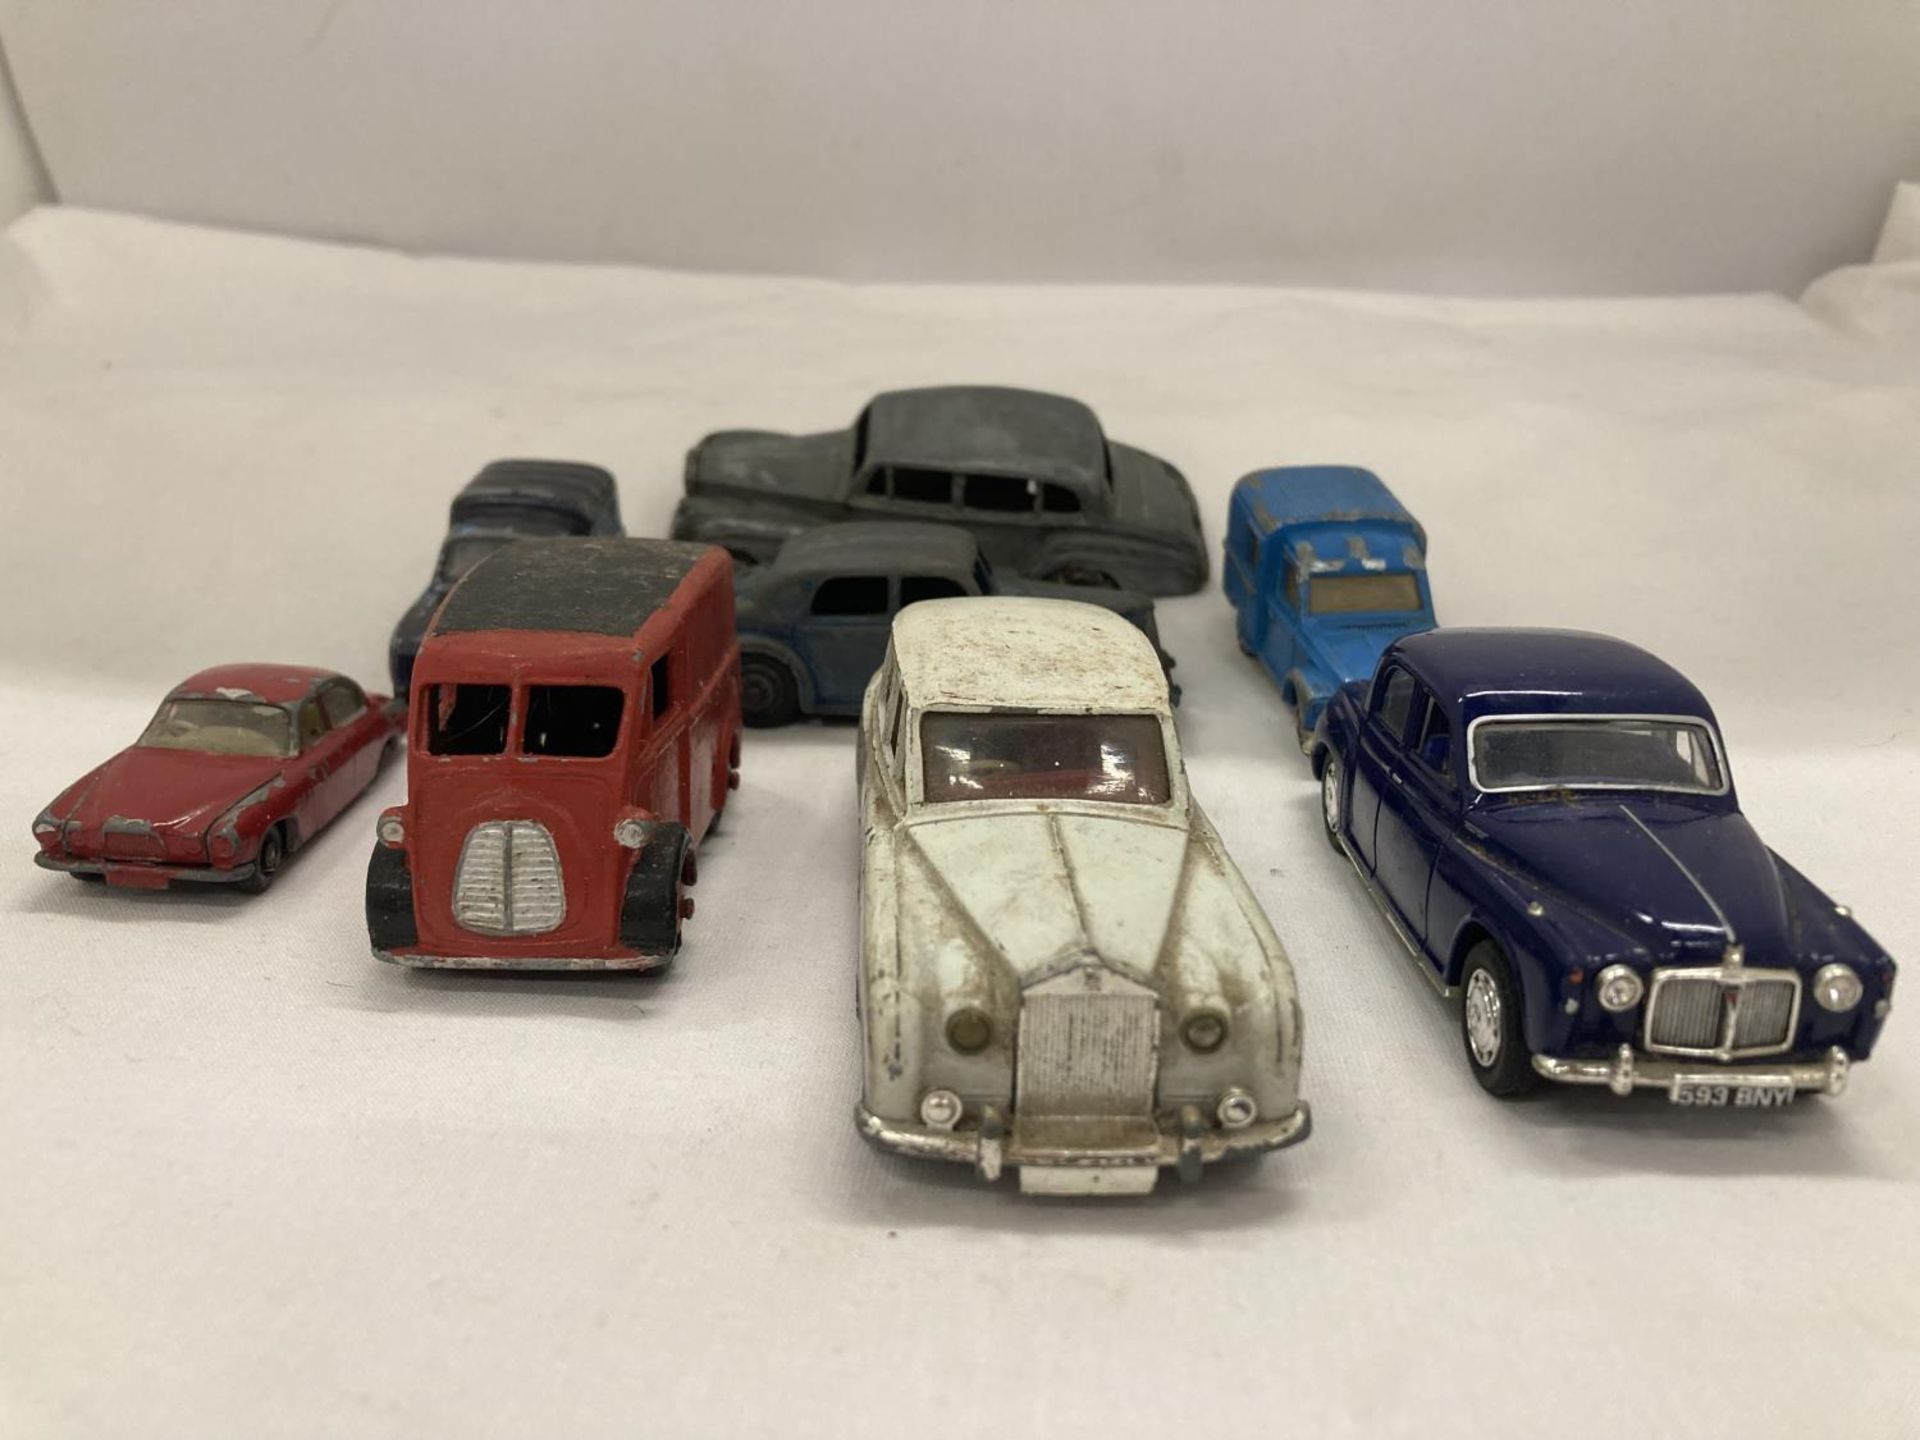 A COLLECTION OF VINTAGE DIE-CAST CARS TO INCLUDE DINKY TOYS - 8 IN TOTAL - Image 2 of 2